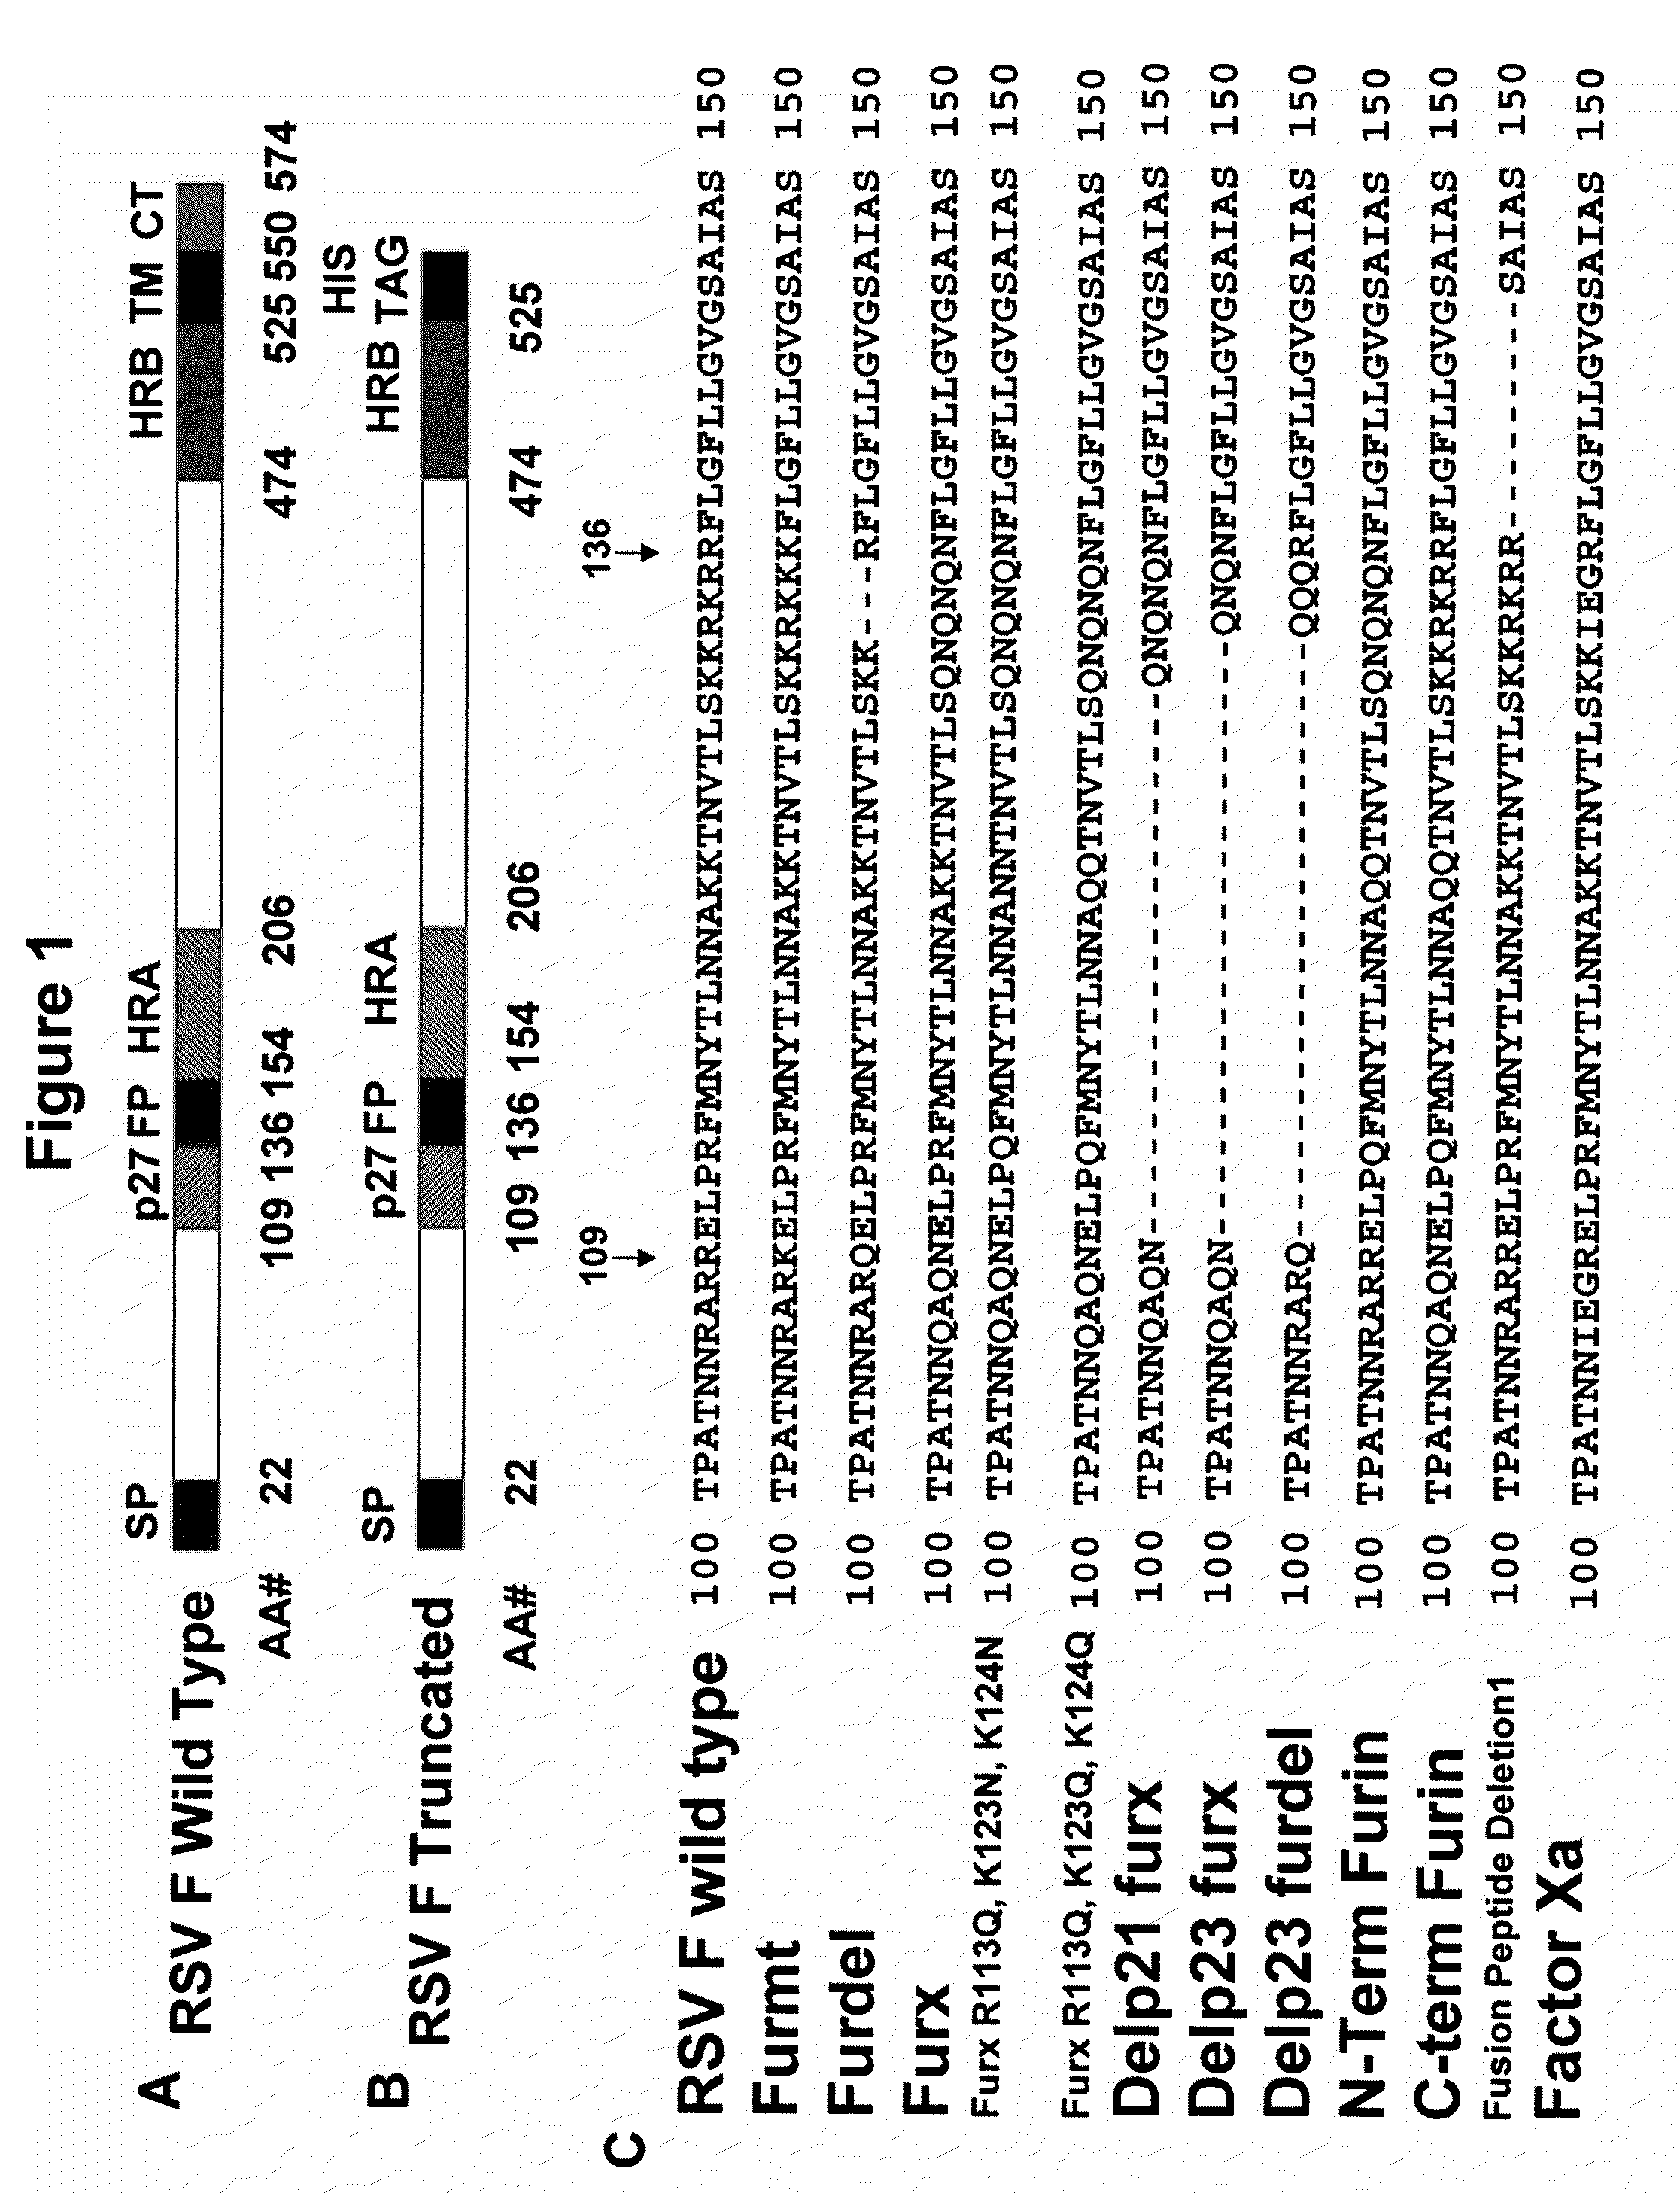 Rsv f protein compositions and methods for making same